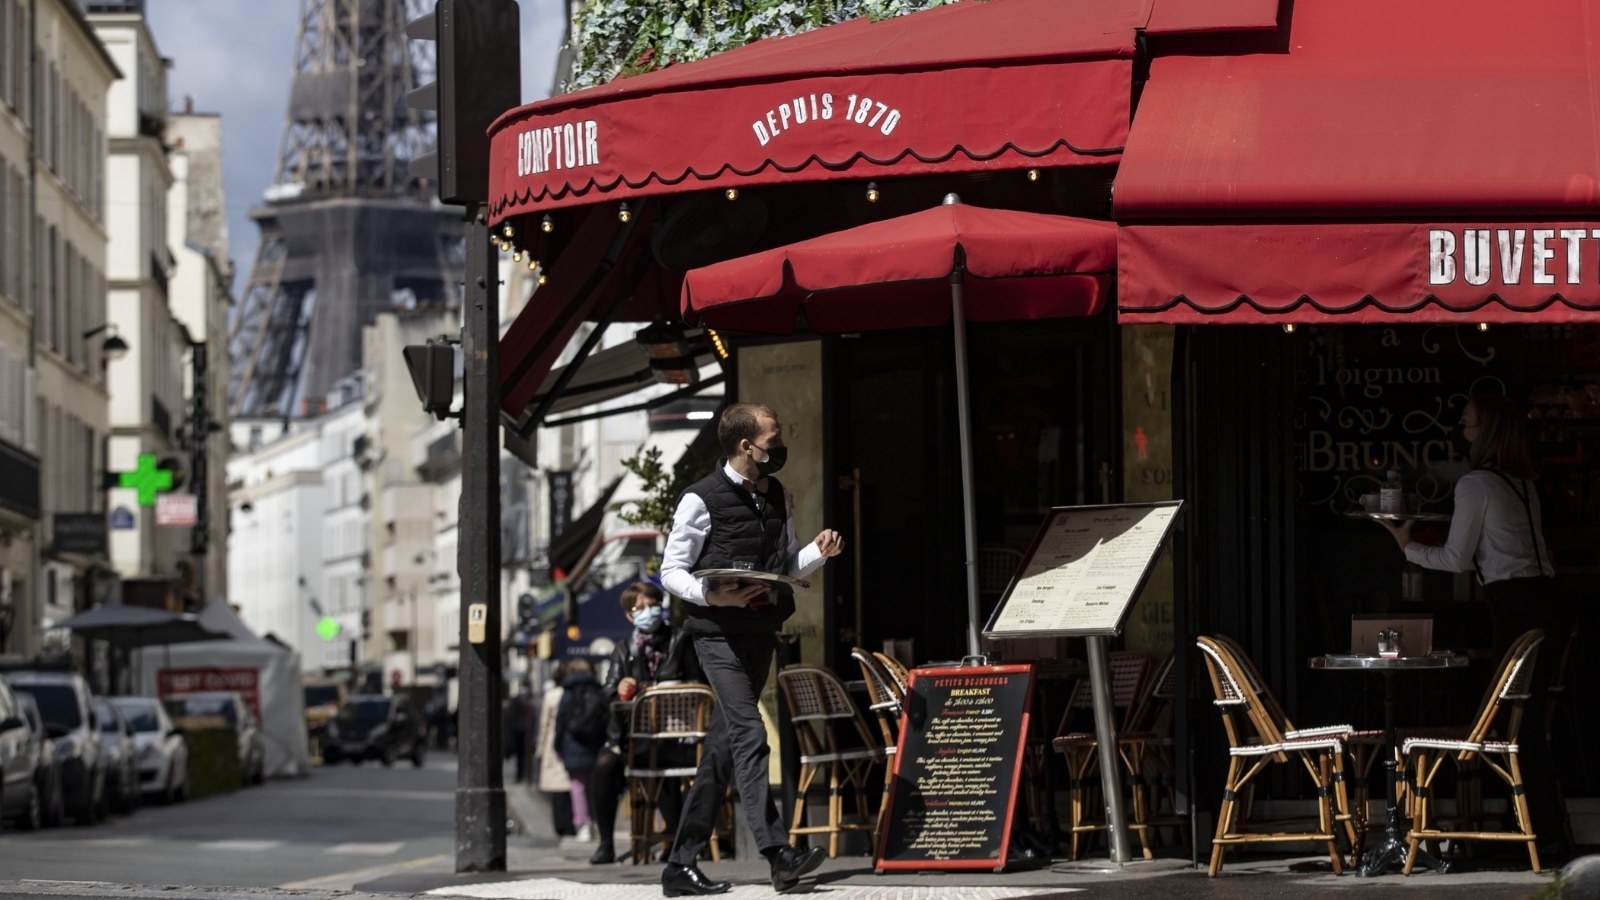 A waiter serves beverages on a cafe's terrace near the Eiffel Tower. The roof of the restaurant and the awnings on the terrace are red with white inscriptions with the name and year of opening of the restaurant. The terrace has chairs and tables for visitors, as well as a large menu board.